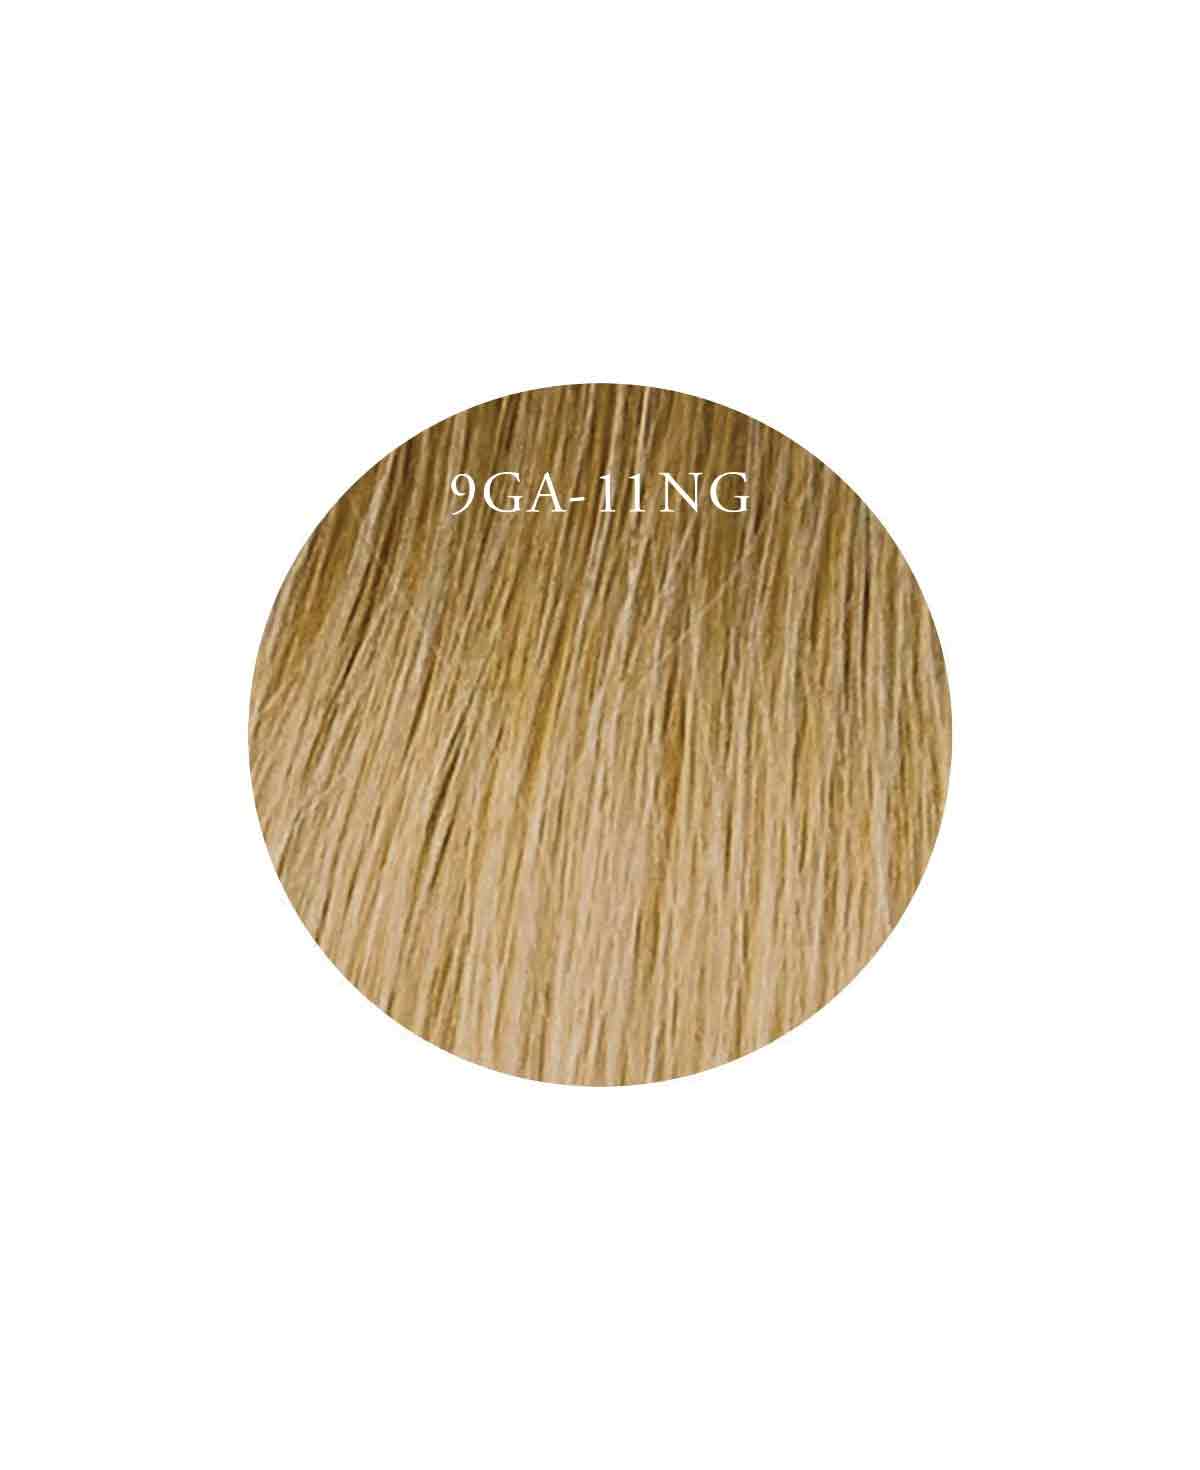 45-50cm (20") TAPE EXTENSIONS - OMBRE - VANILLA SMOOTHIE - 9GA-11NG